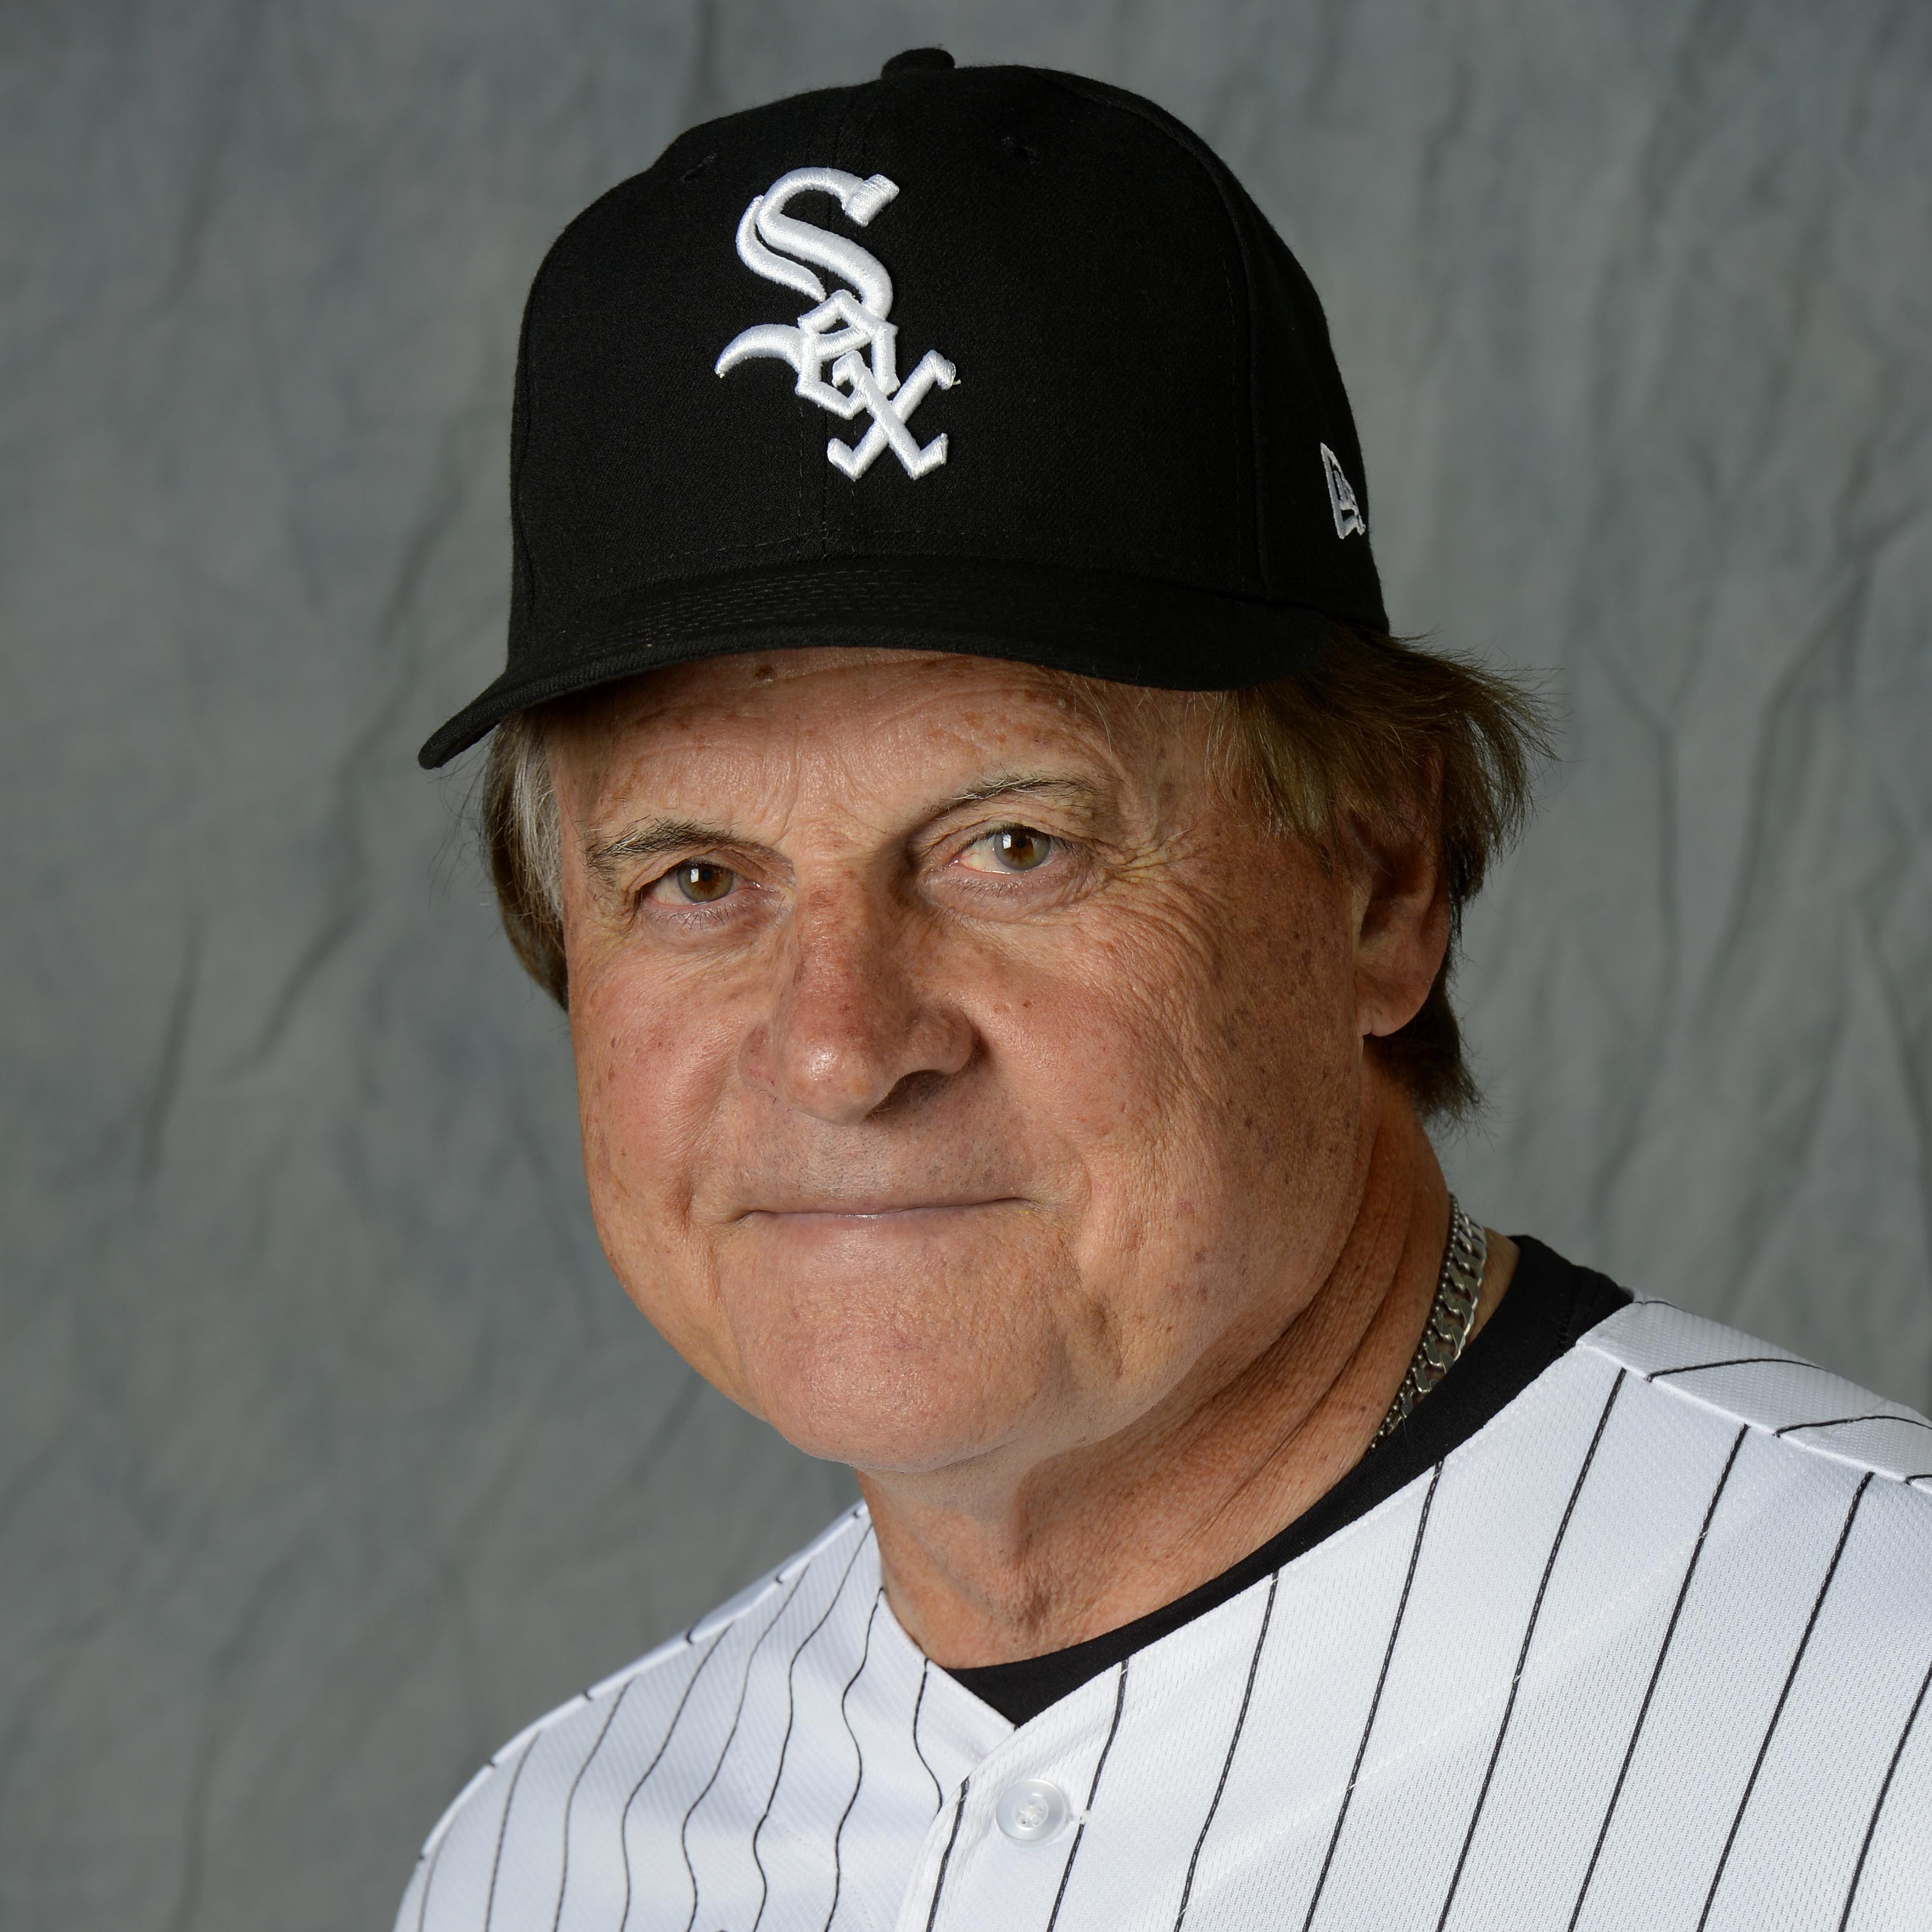 Tony La Russa's Idea to Stop Sign-Stealing: Make the Runner Turn